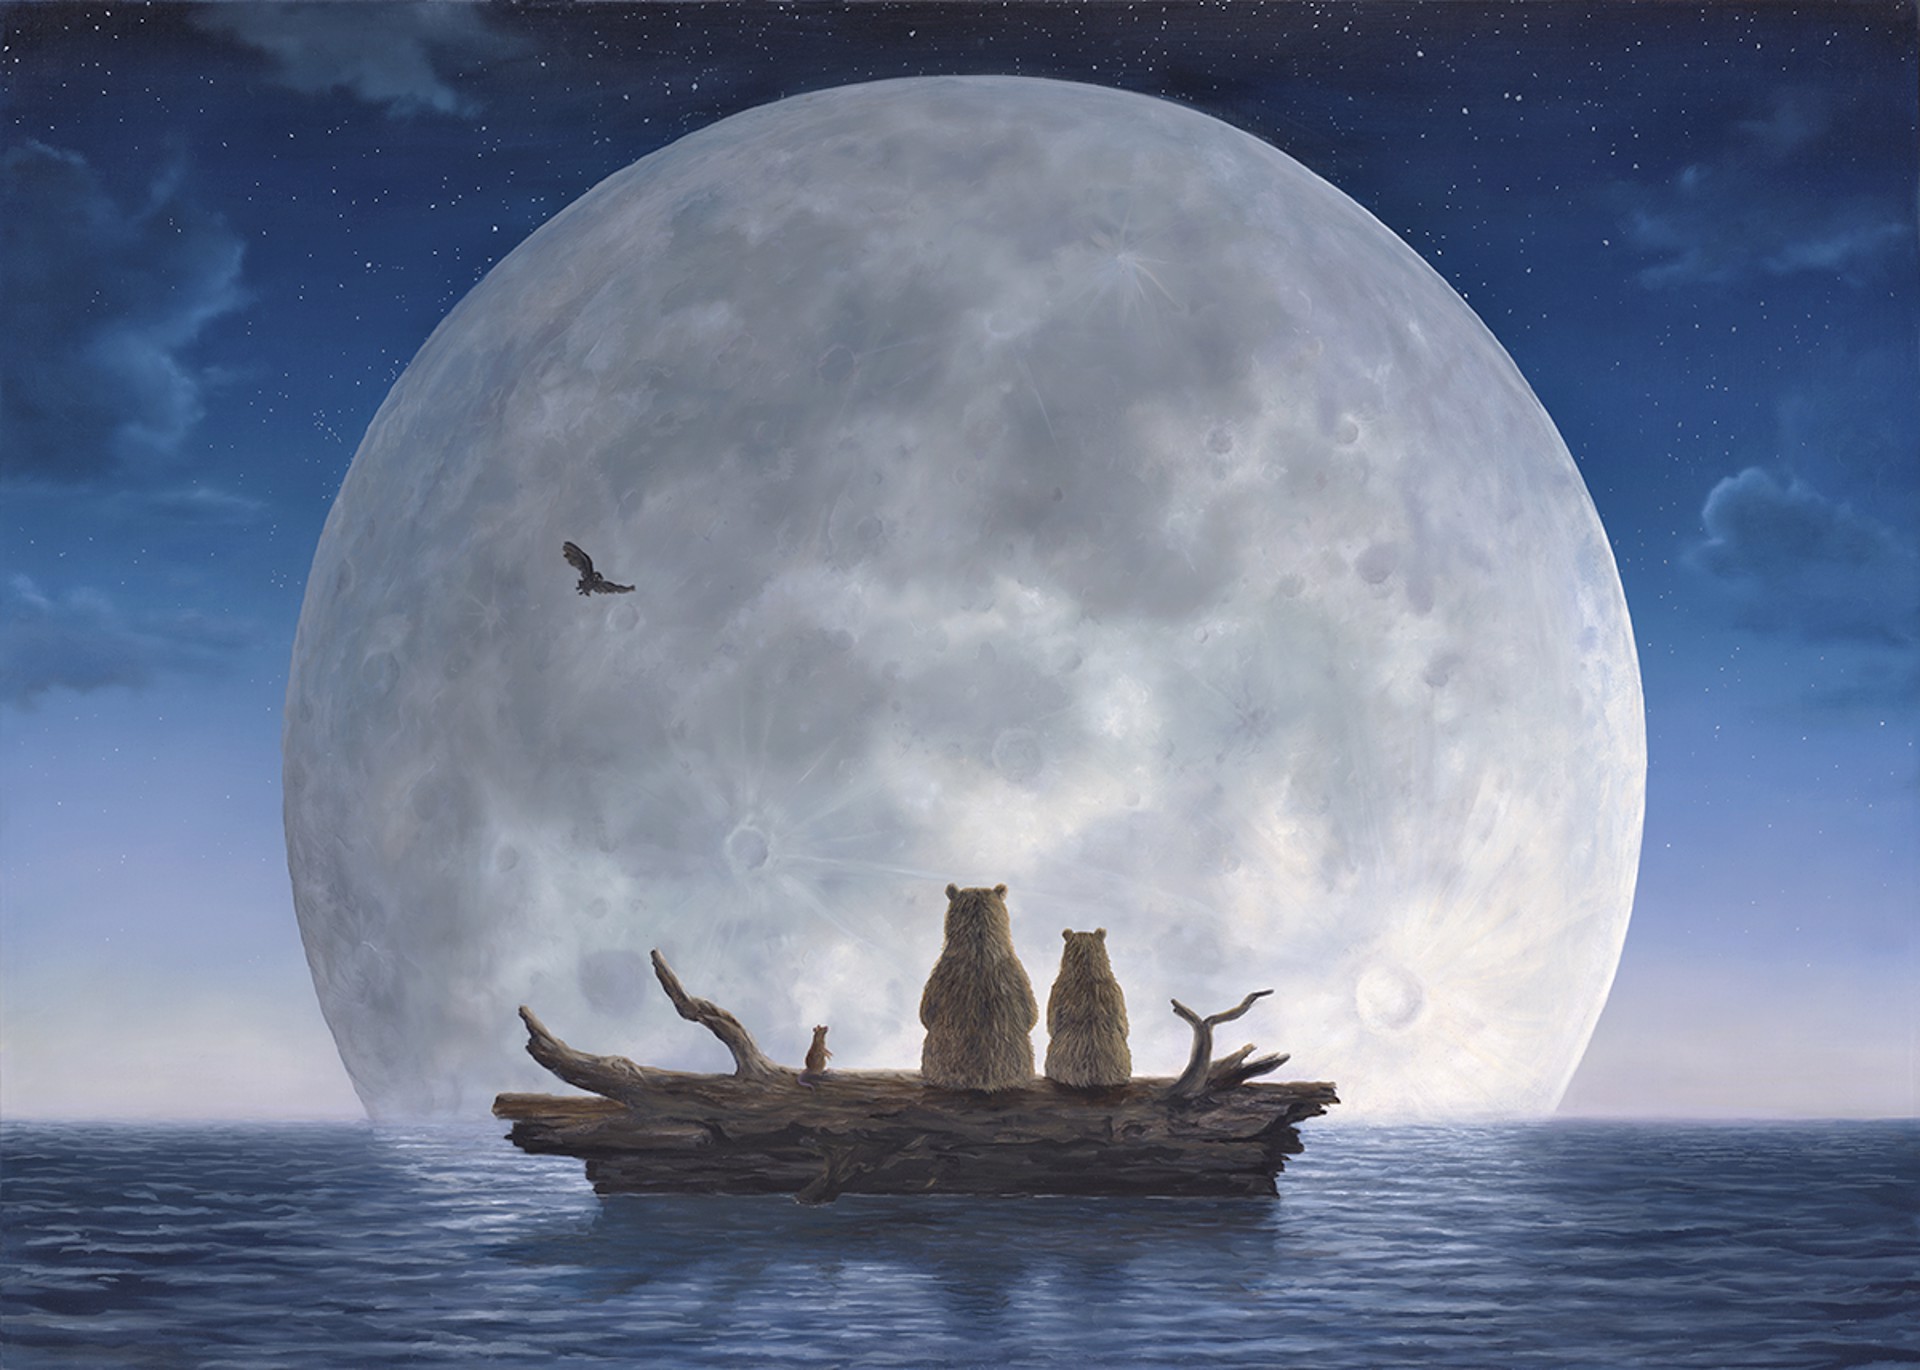 Moonlighters - SOLD OUT ON ALL EDITIONS by Robert Bissell